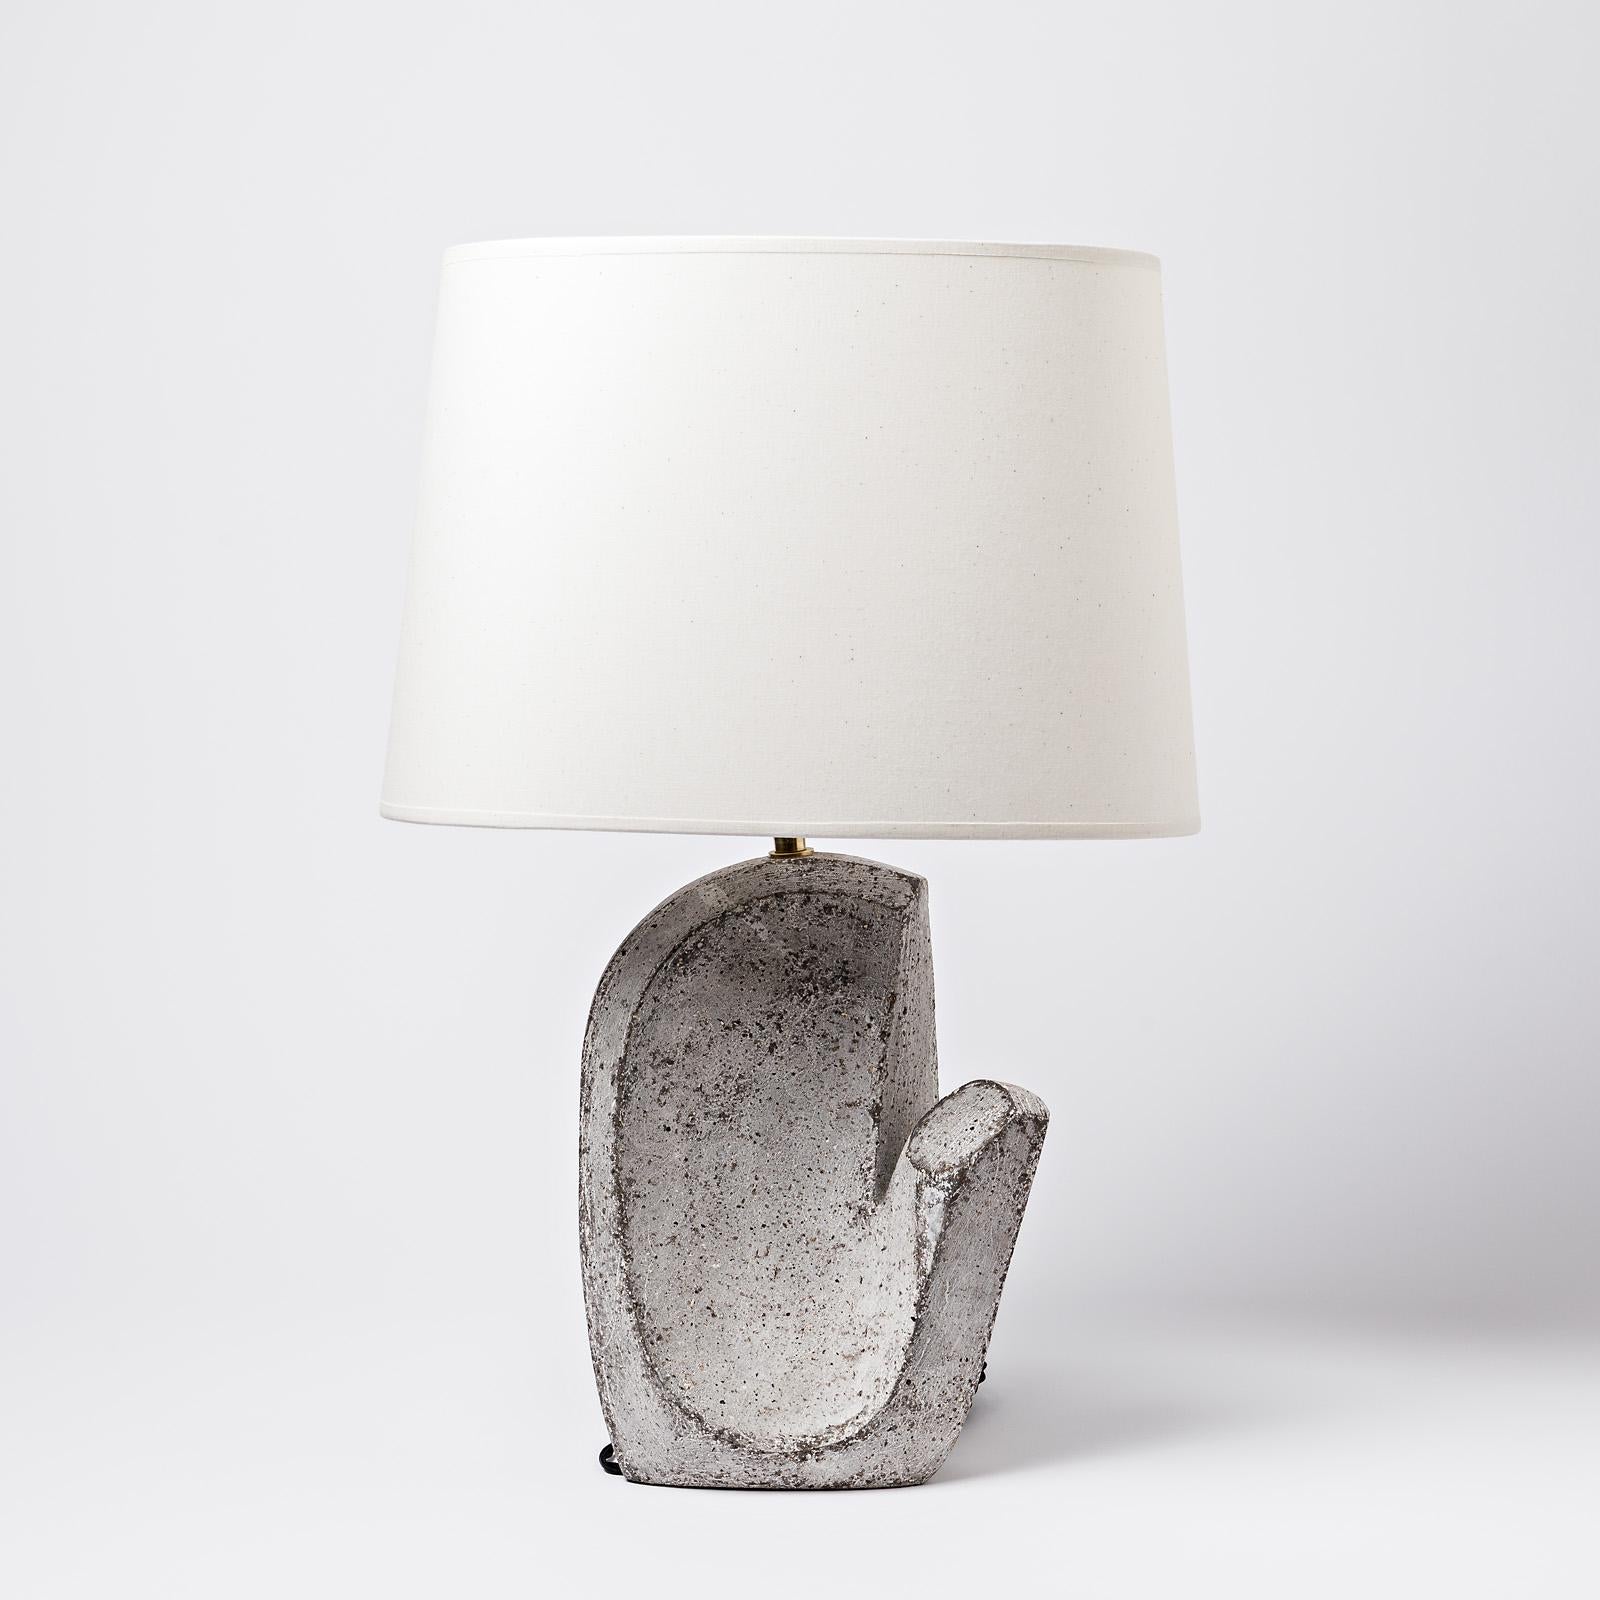 A ceramic table lamp by Maarten Stuer.
Signed under the base.
Sold with the lampshade and a new European electrical system.
2021.
Dimensions:
Dimensions with ceramic, electrical system, lampshade: 53 x 30 x 20 cm
Dimensions without ceramic,